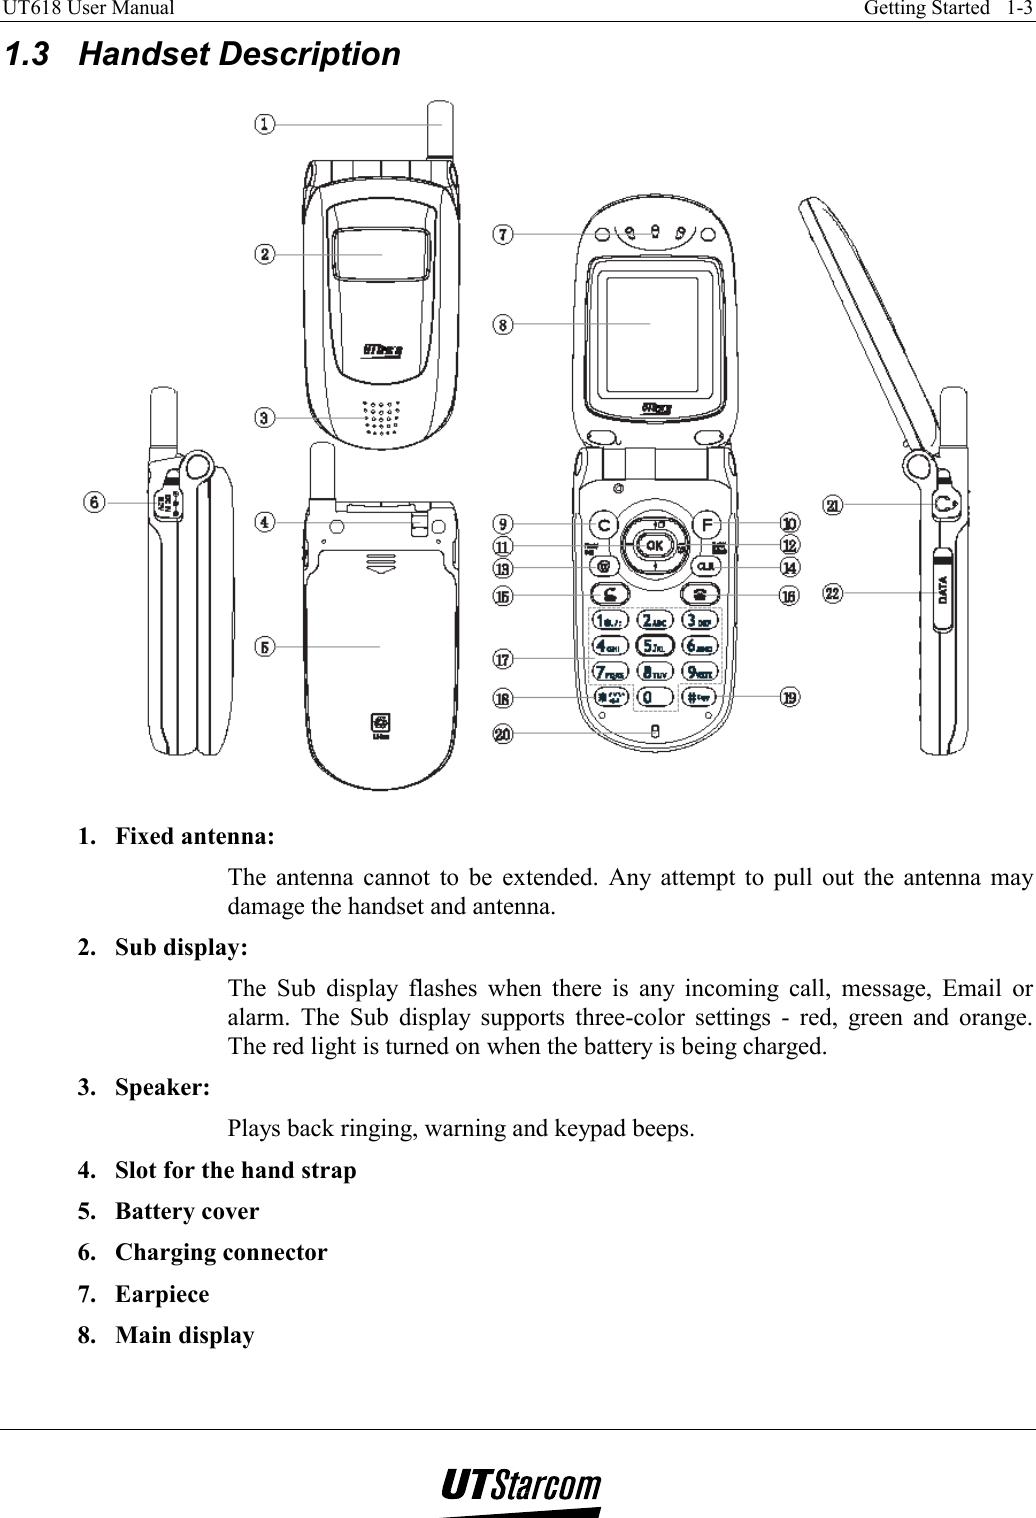 UT618 User Manual    Getting Started   1-3   1.3 Handset Description  1. Fixed antenna: The antenna cannot to be extended. Any attempt to pull out the antenna may damage the handset and antenna. 2. Sub display: The Sub display flashes when there is any incoming call, message, Email or alarm. The Sub display supports three-color settings - red, green and orange. The red light is turned on when the battery is being charged. 3. Speaker: Plays back ringing, warning and keypad beeps. 4.  Slot for the hand strap 5. Battery cover 6. Charging connector 7. Earpiece 8. Main display 